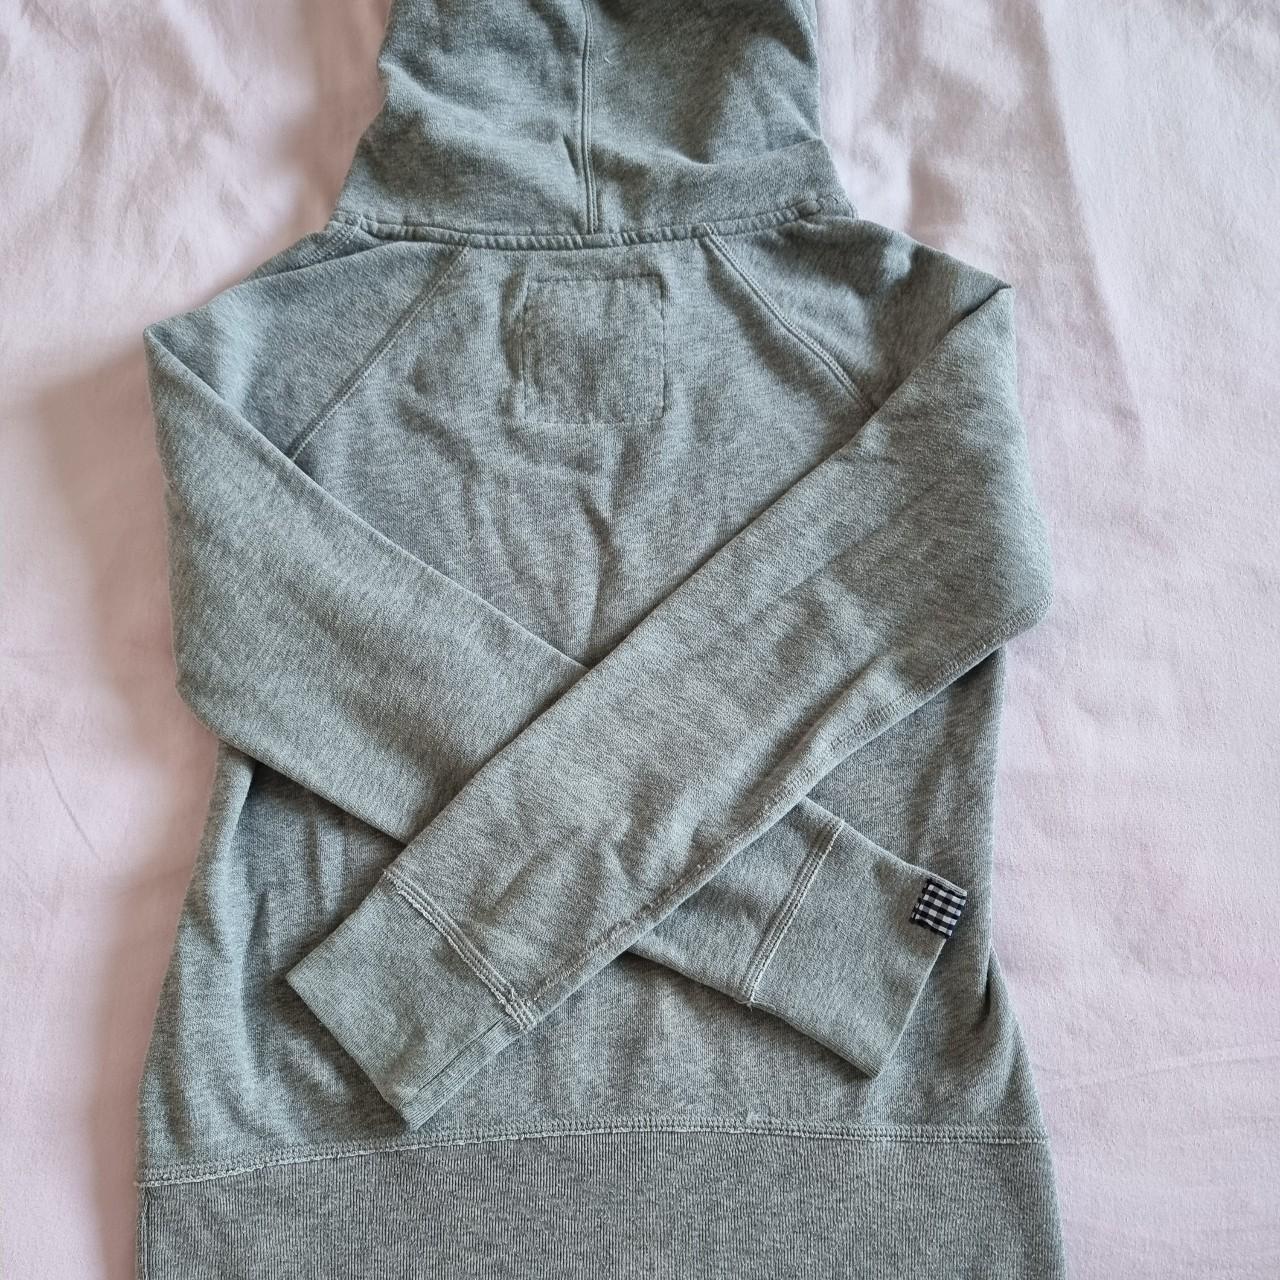 Gilly Hicks hoodie. Grey pull on size M - Depop